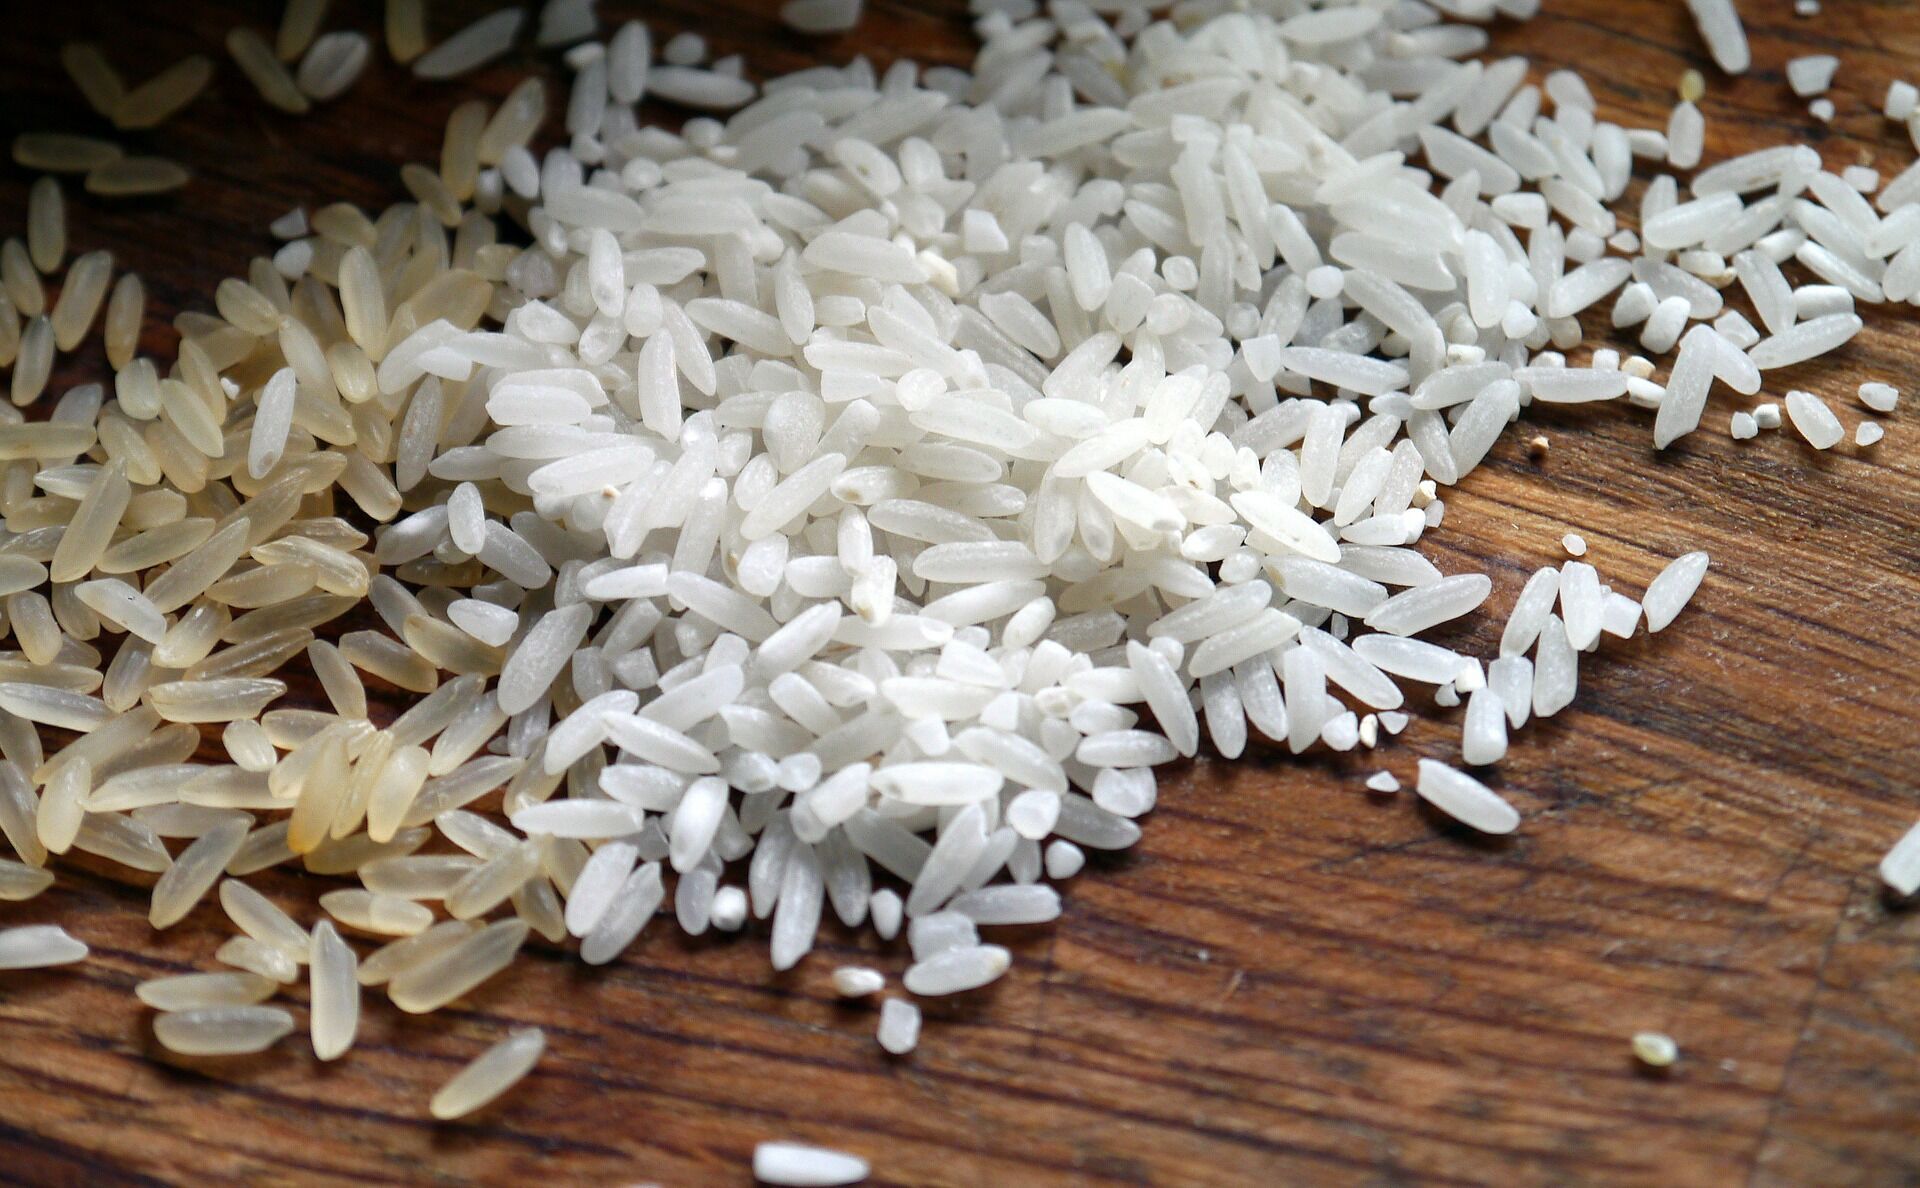 Rice is a non-dietary product